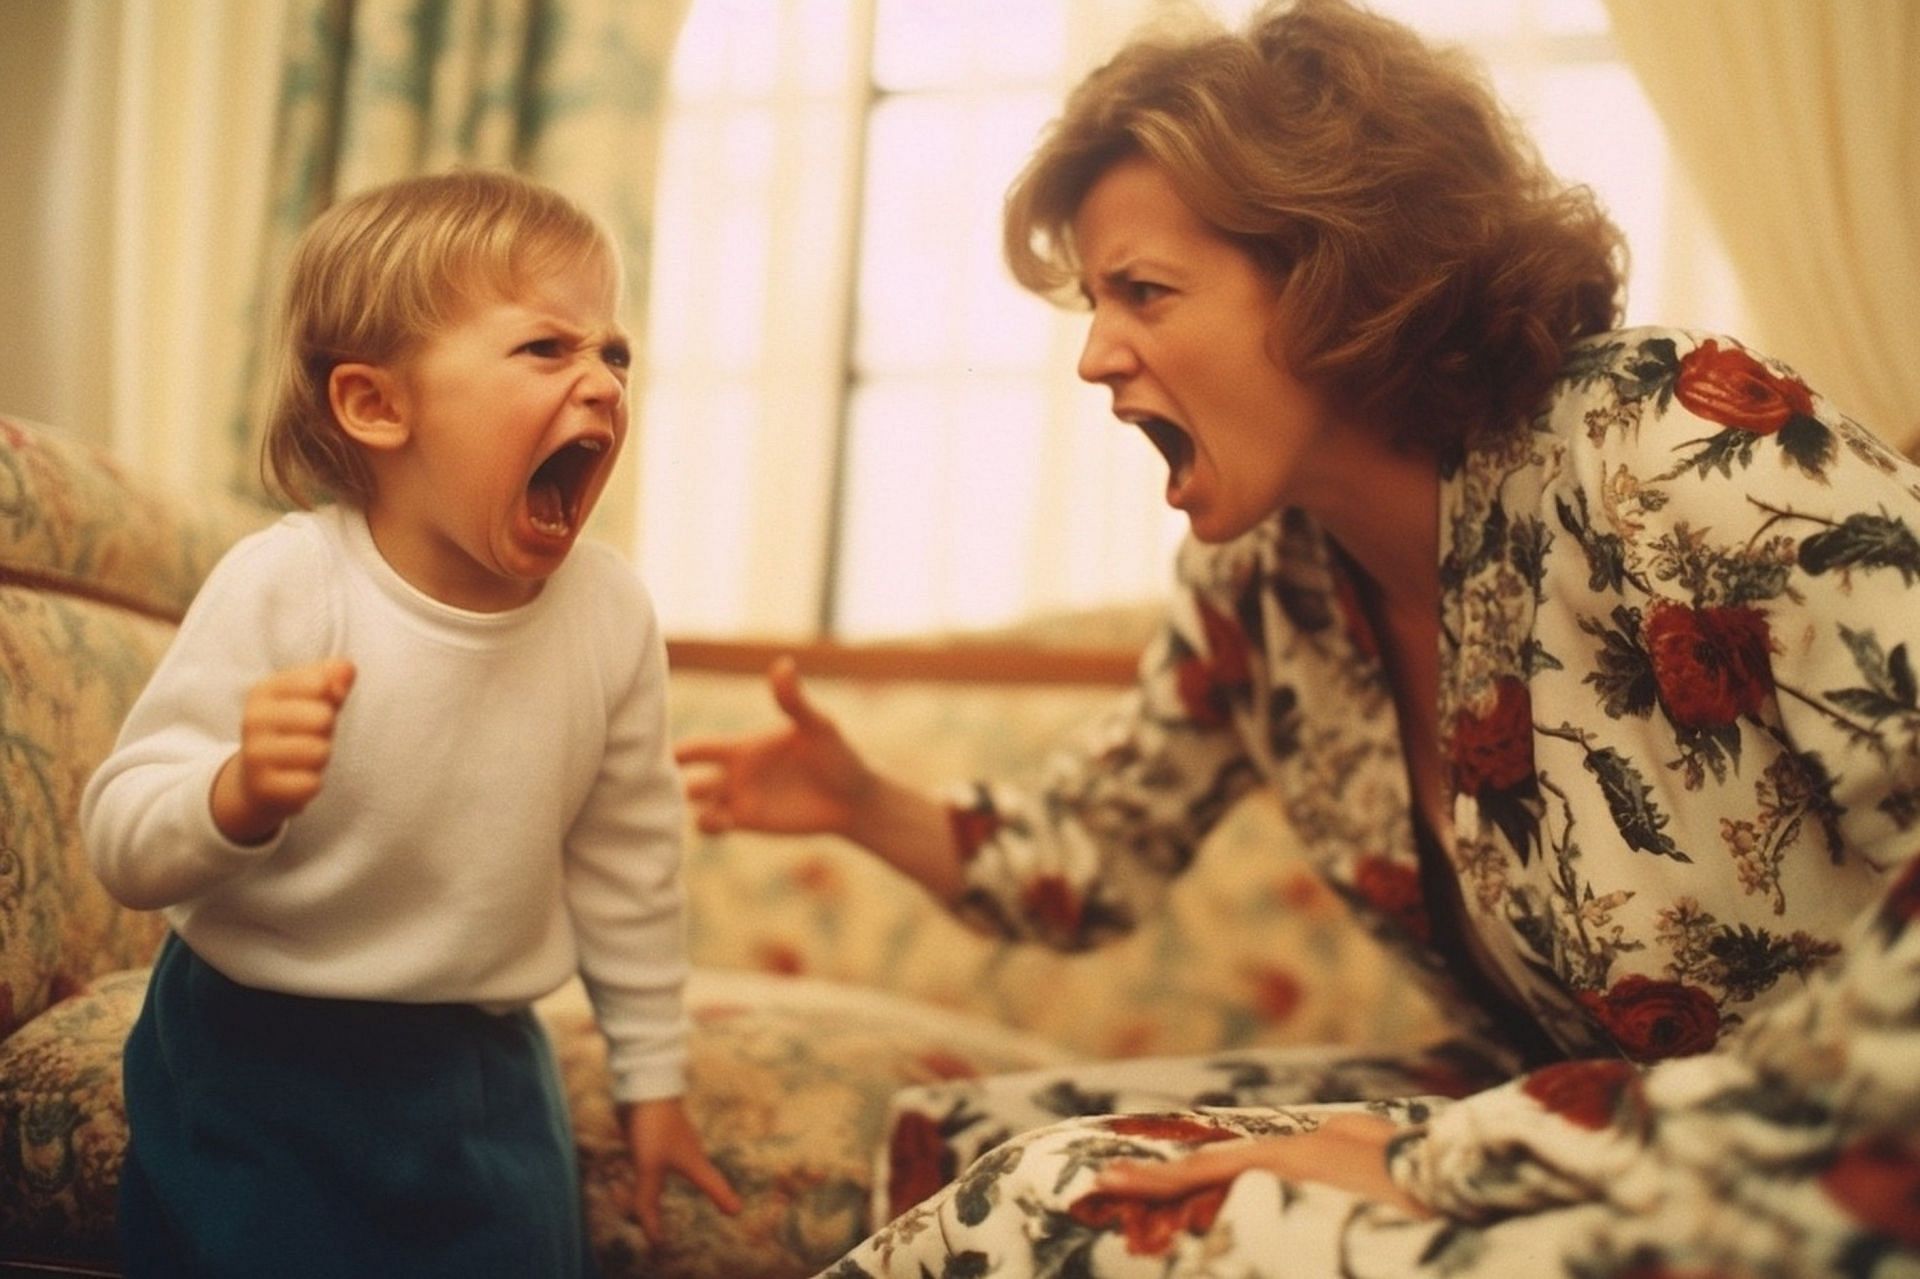 Shouting at children may seem like the solution, but it definitely doesn